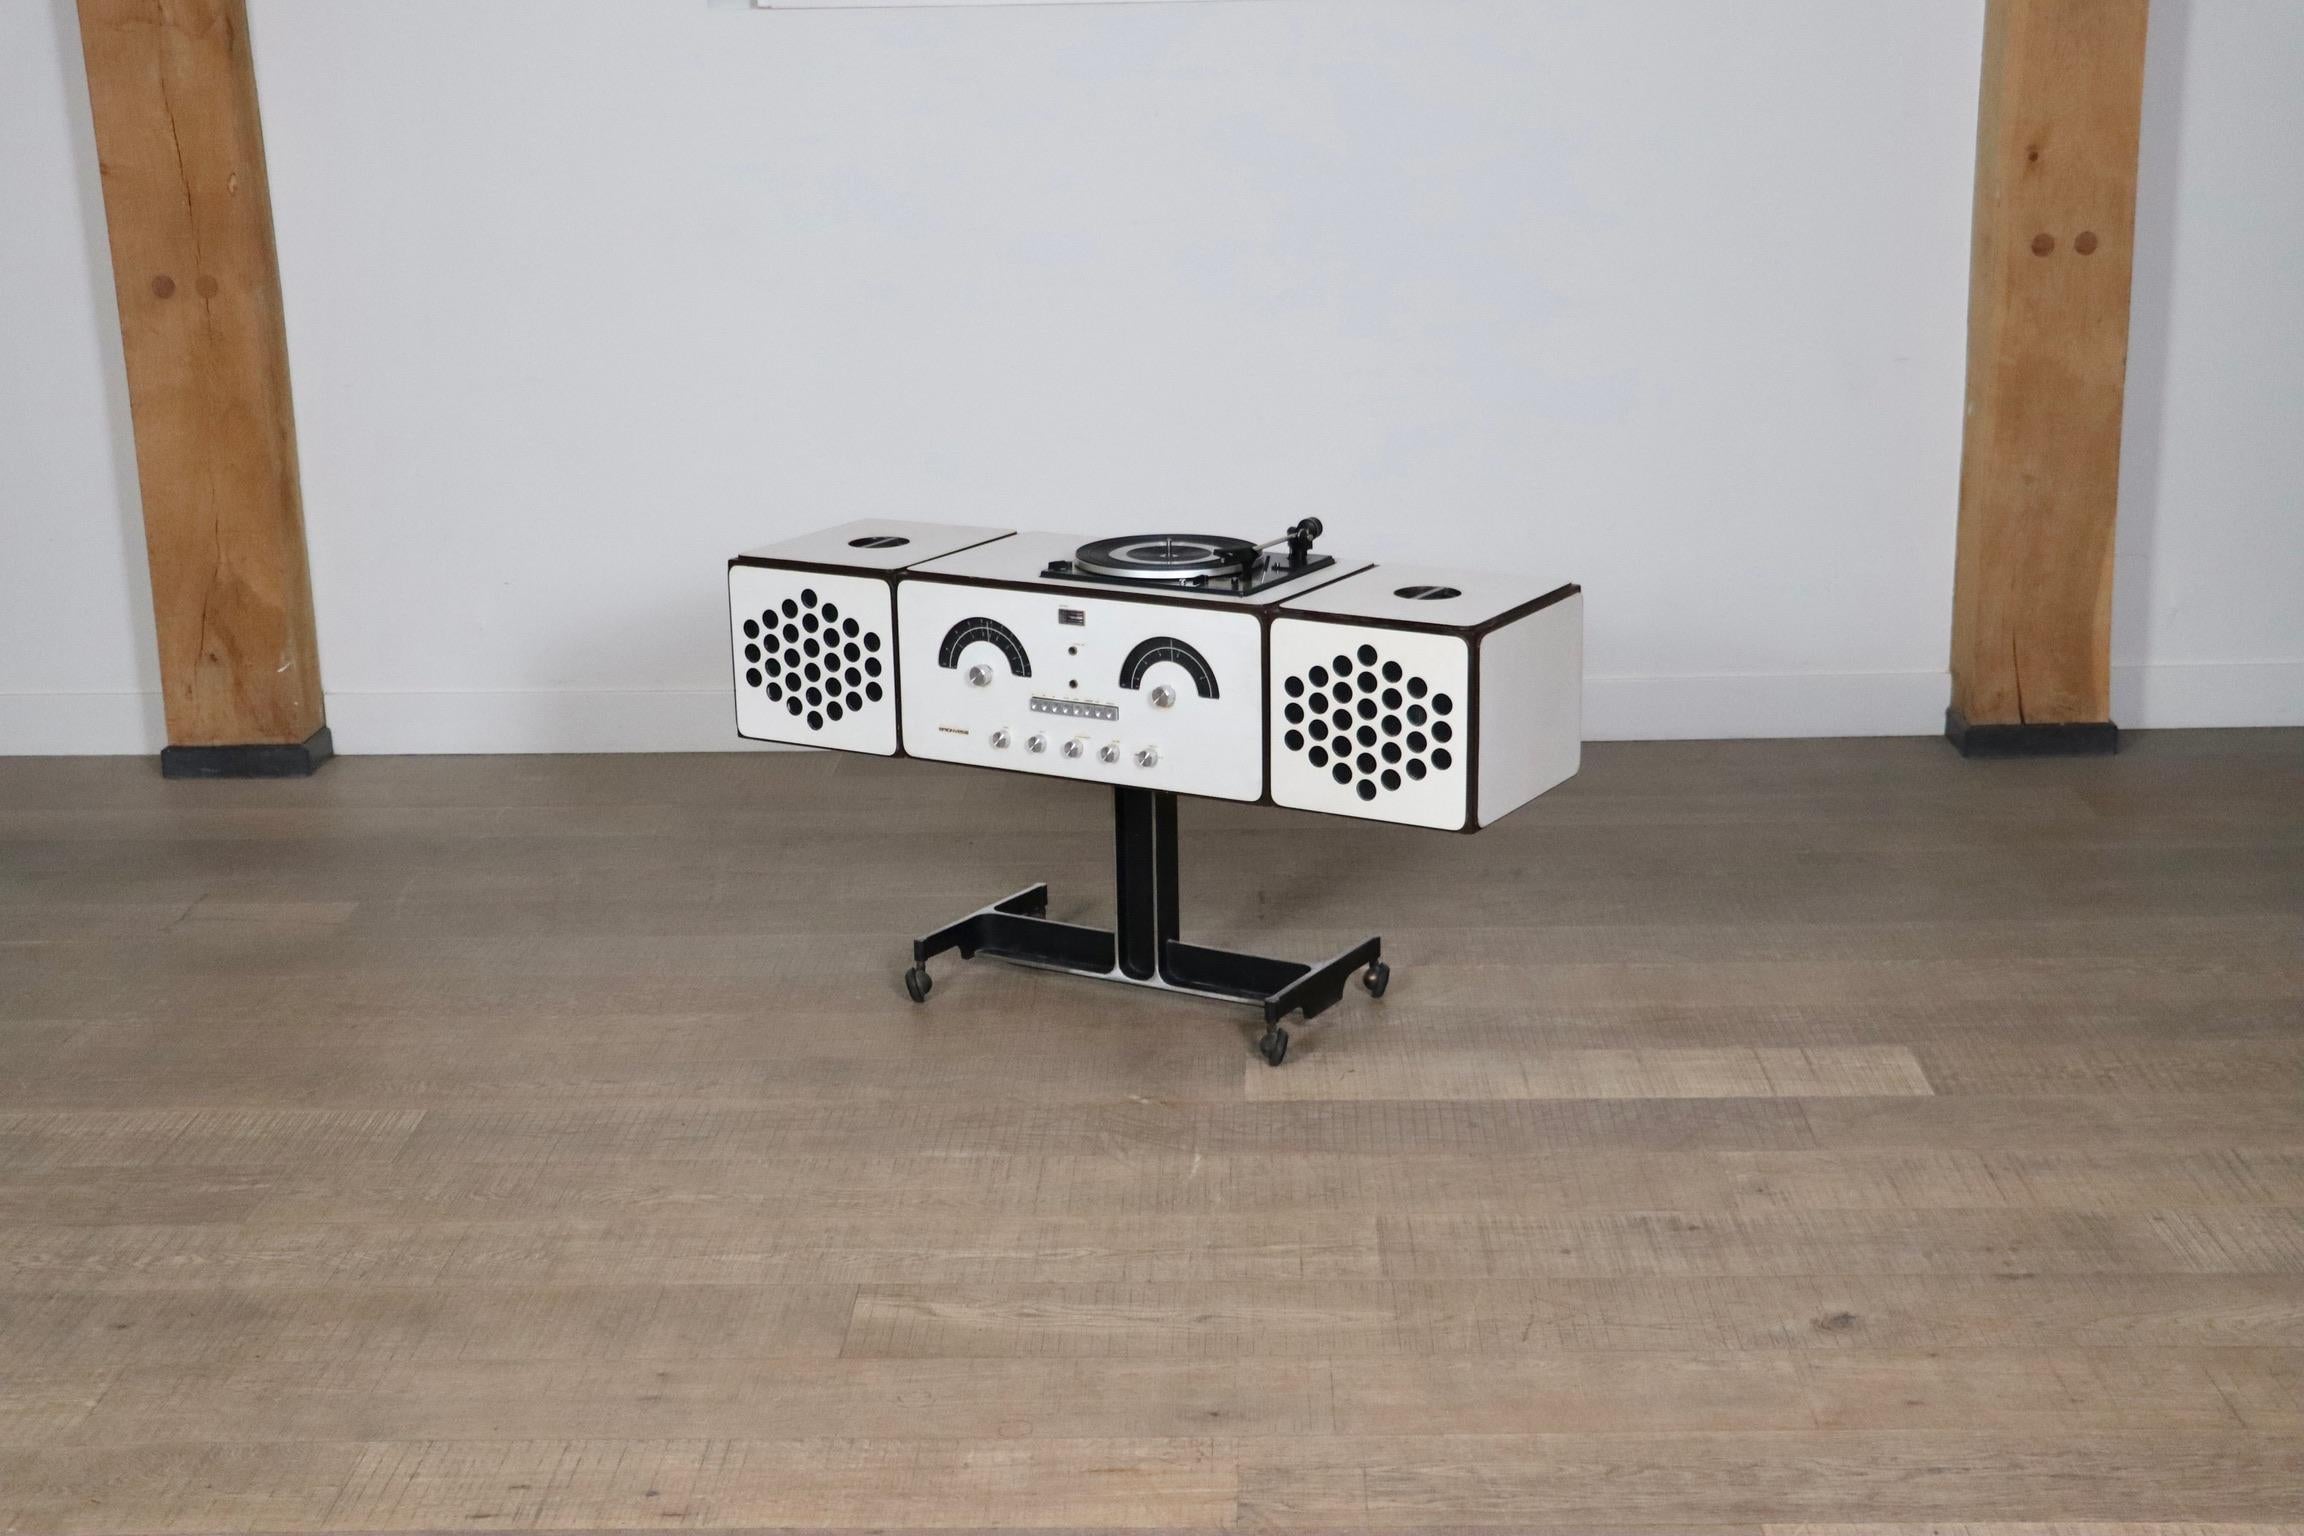 Nice Brionvega RR126 radio in white by Achille and Pier Giacomo Castiglioni, Italy 1960s.
RR126 stereo system was designed in 1965 by brothers Achille and Pier Giacomo Castiglioni. This one is made of white veneer and manufactured by Brionvega,